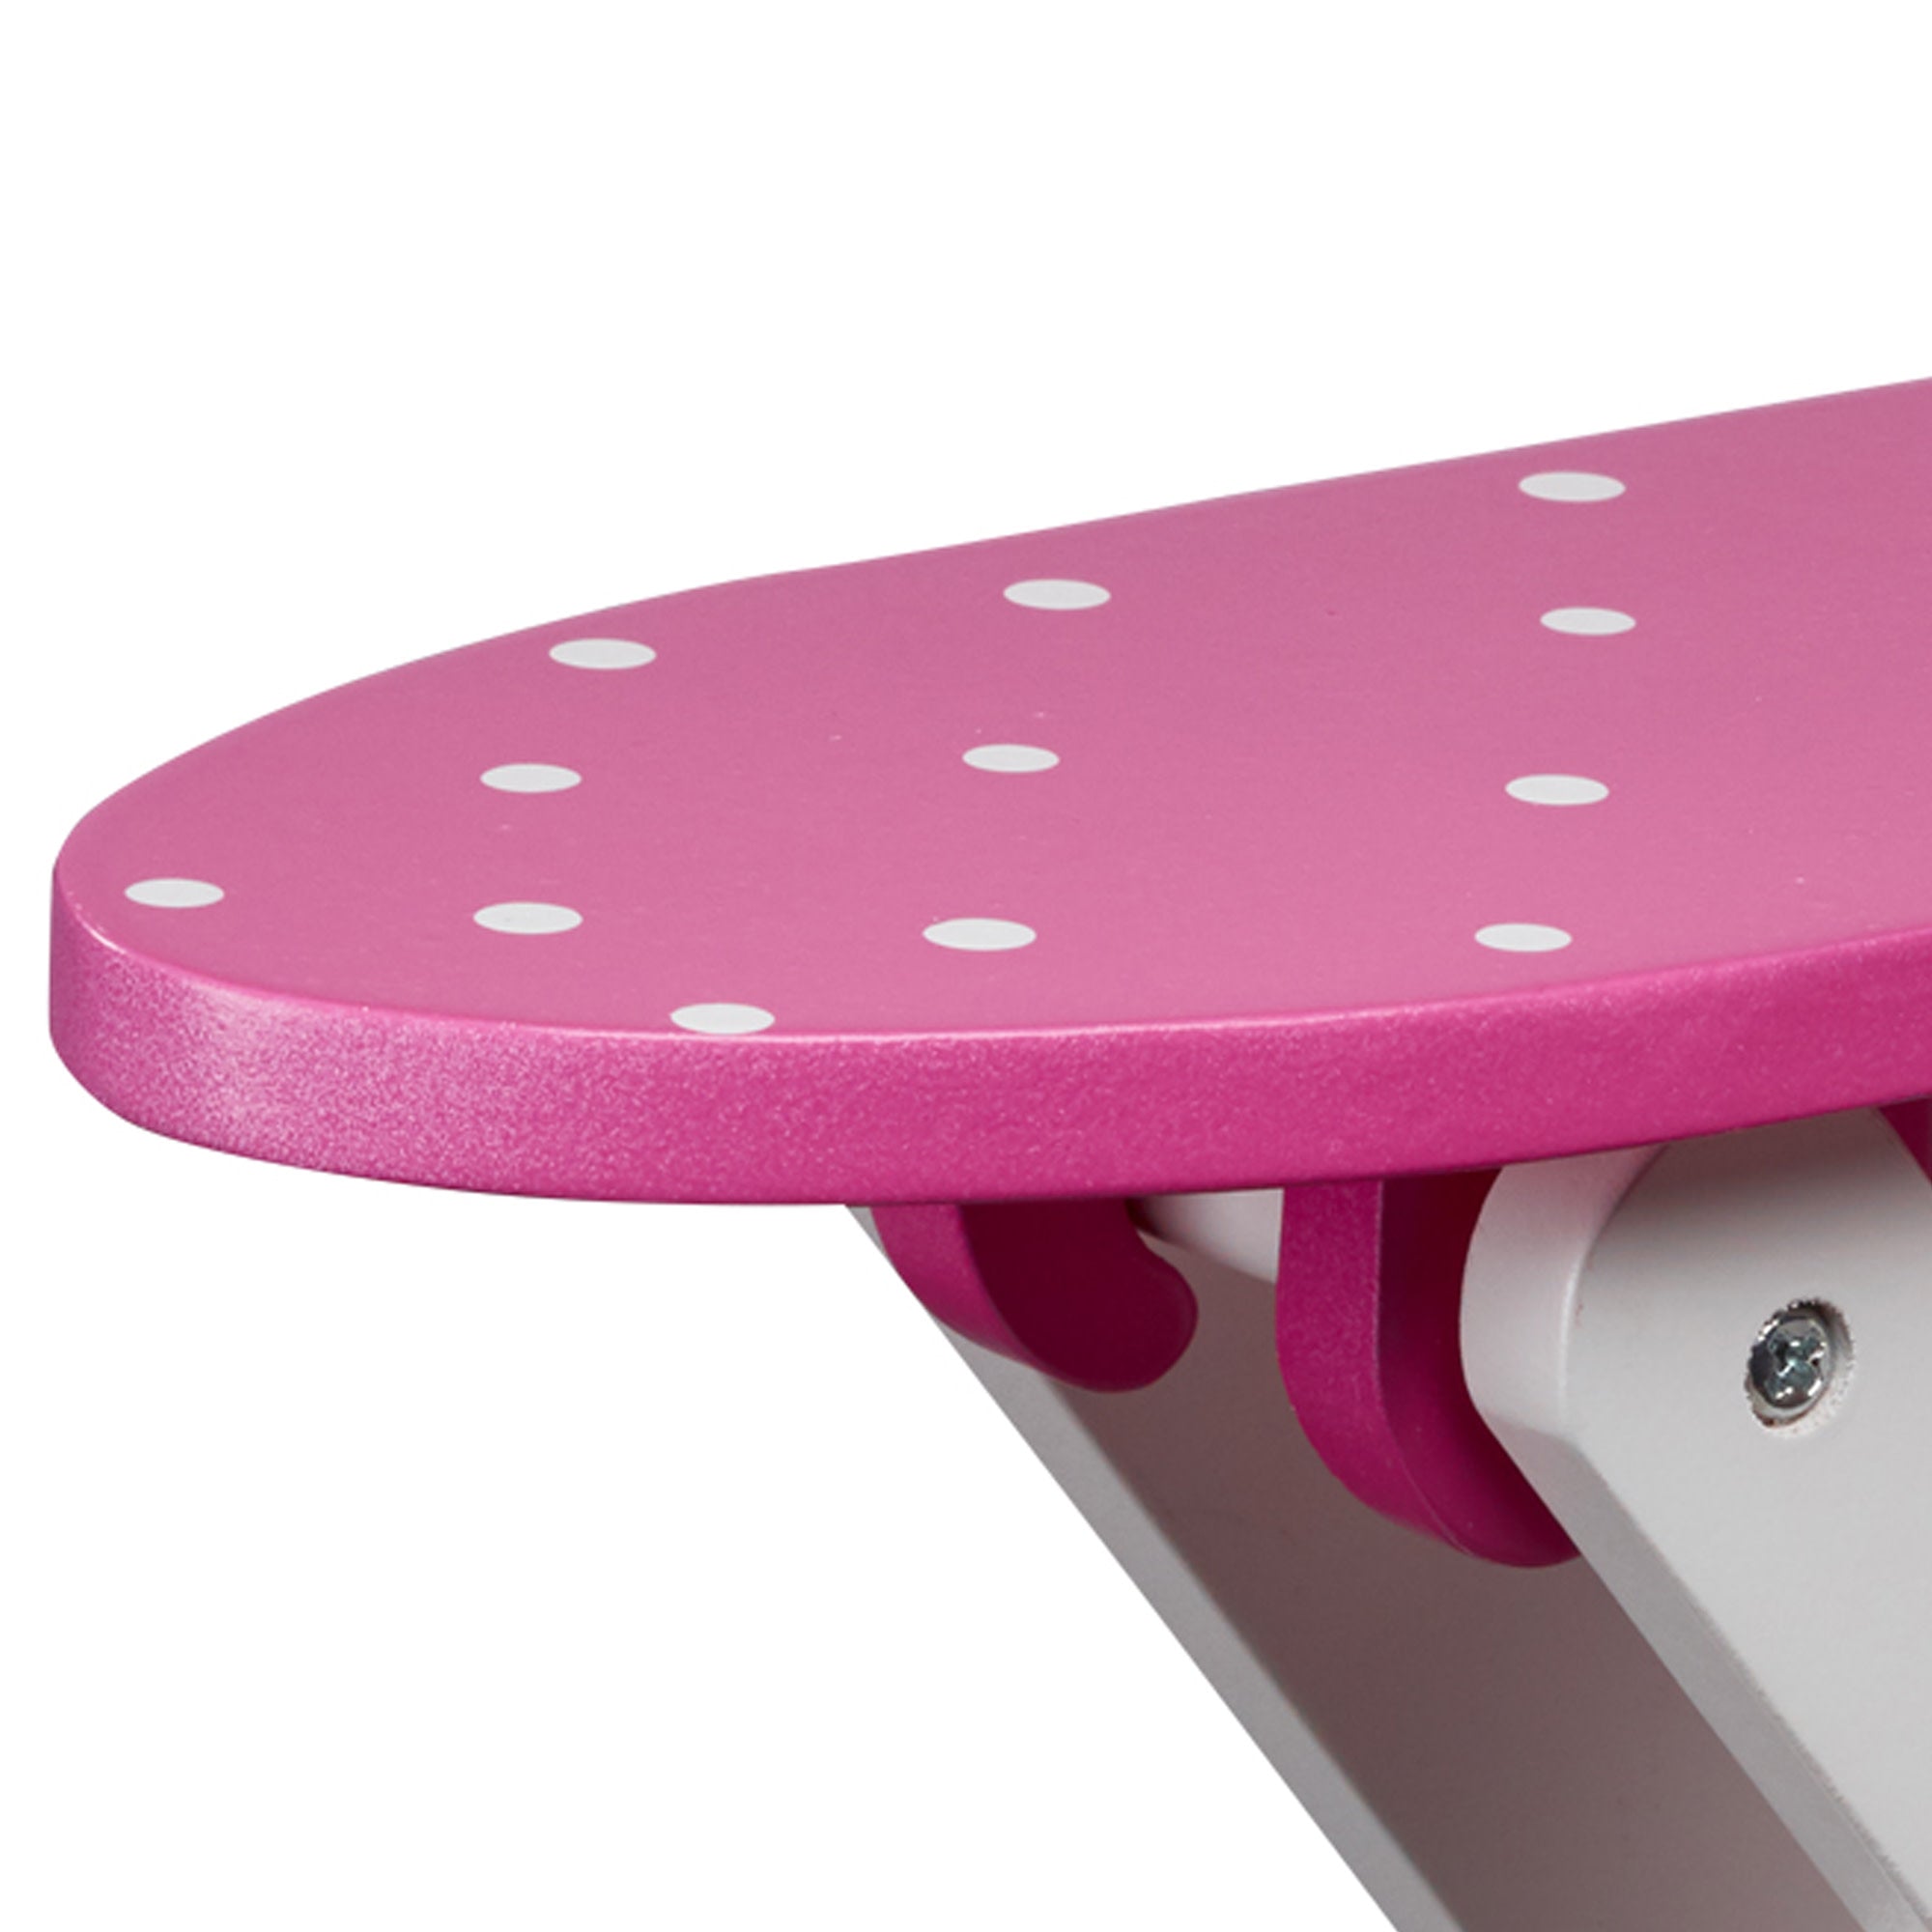 Olivia's Little World Little Princess Wooden Doll Ironing Board and Iron, Pink/White